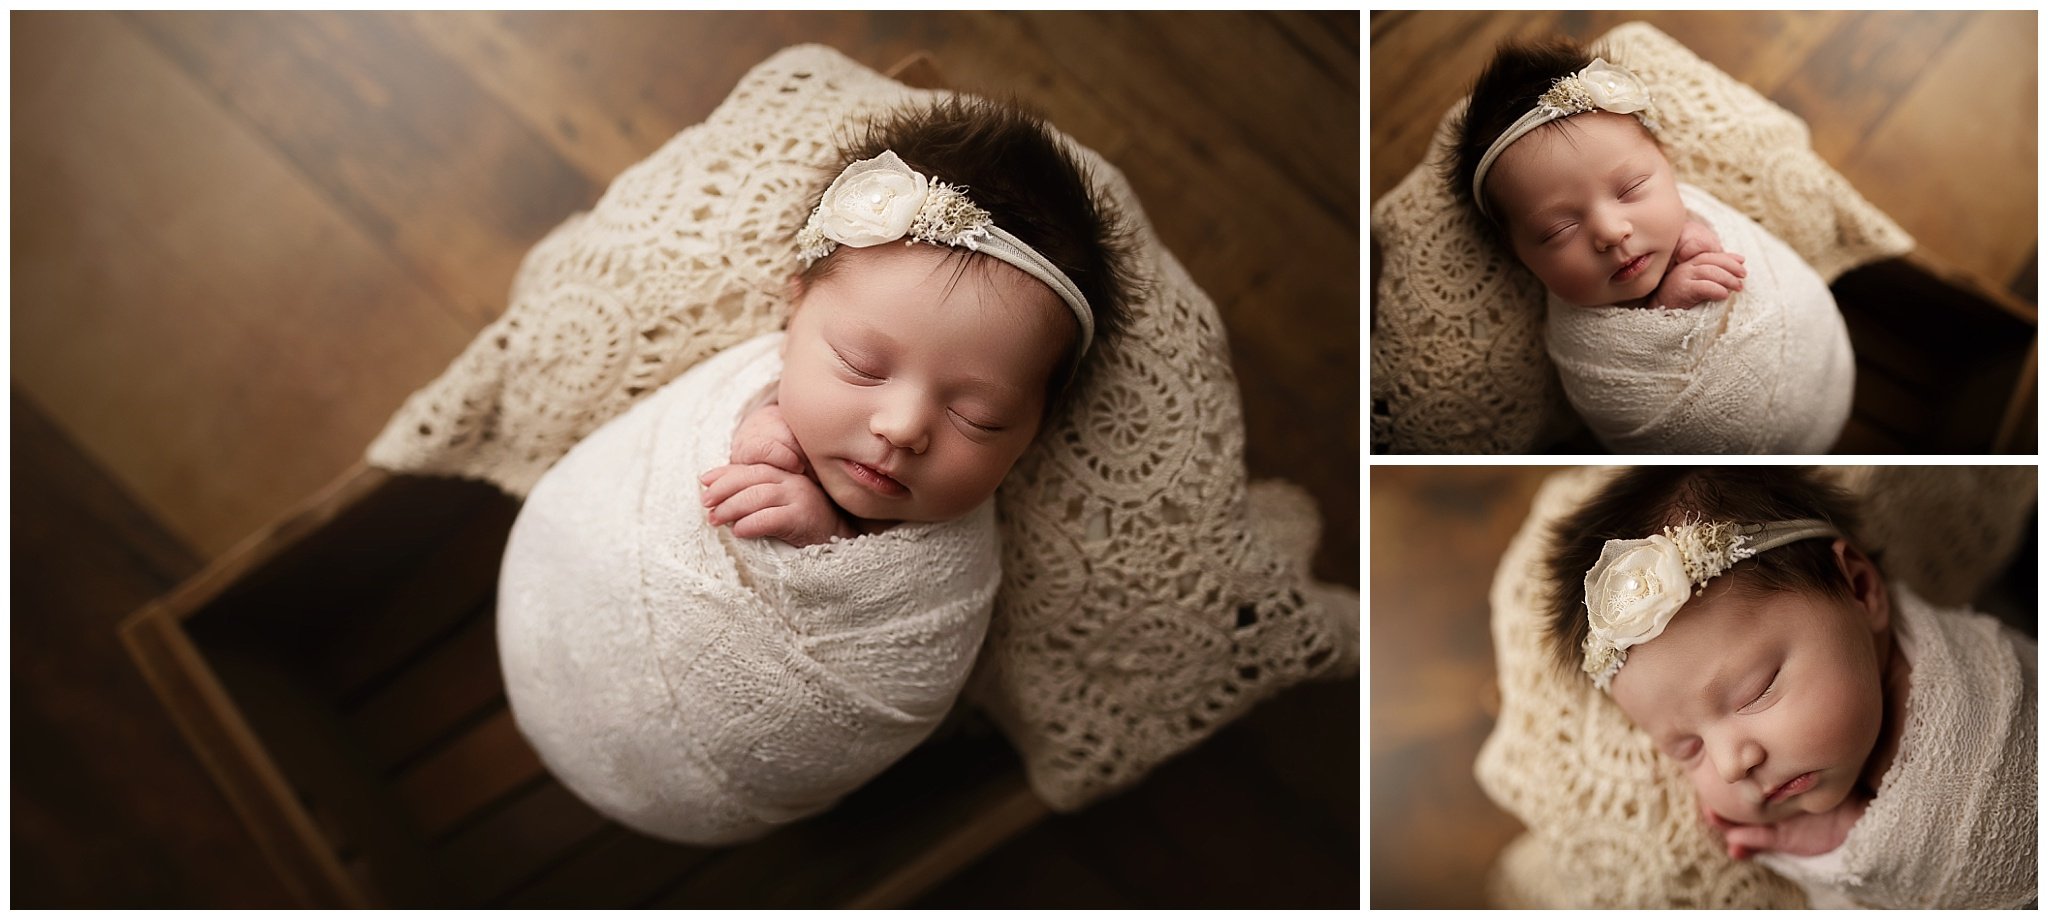 This Baby Has The Most Amazing Hair! - Hocus Focus Photography